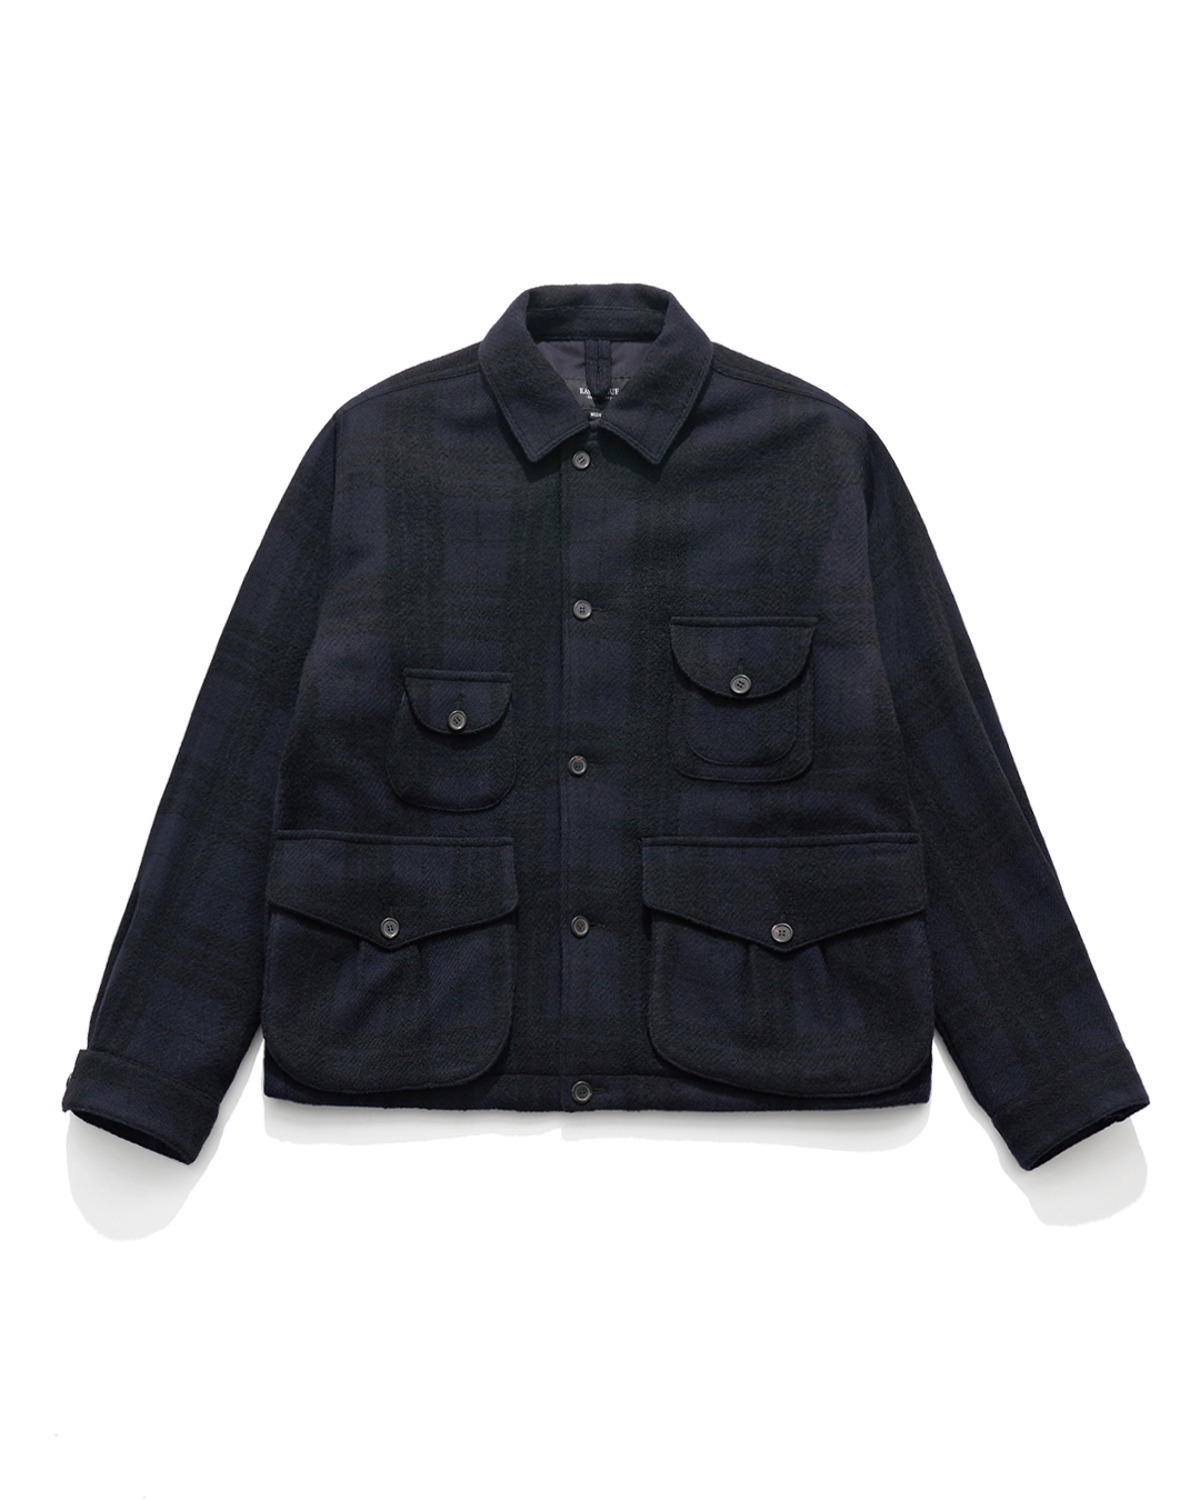 TRAPPER JACKET / NAVY CHECK WOOL